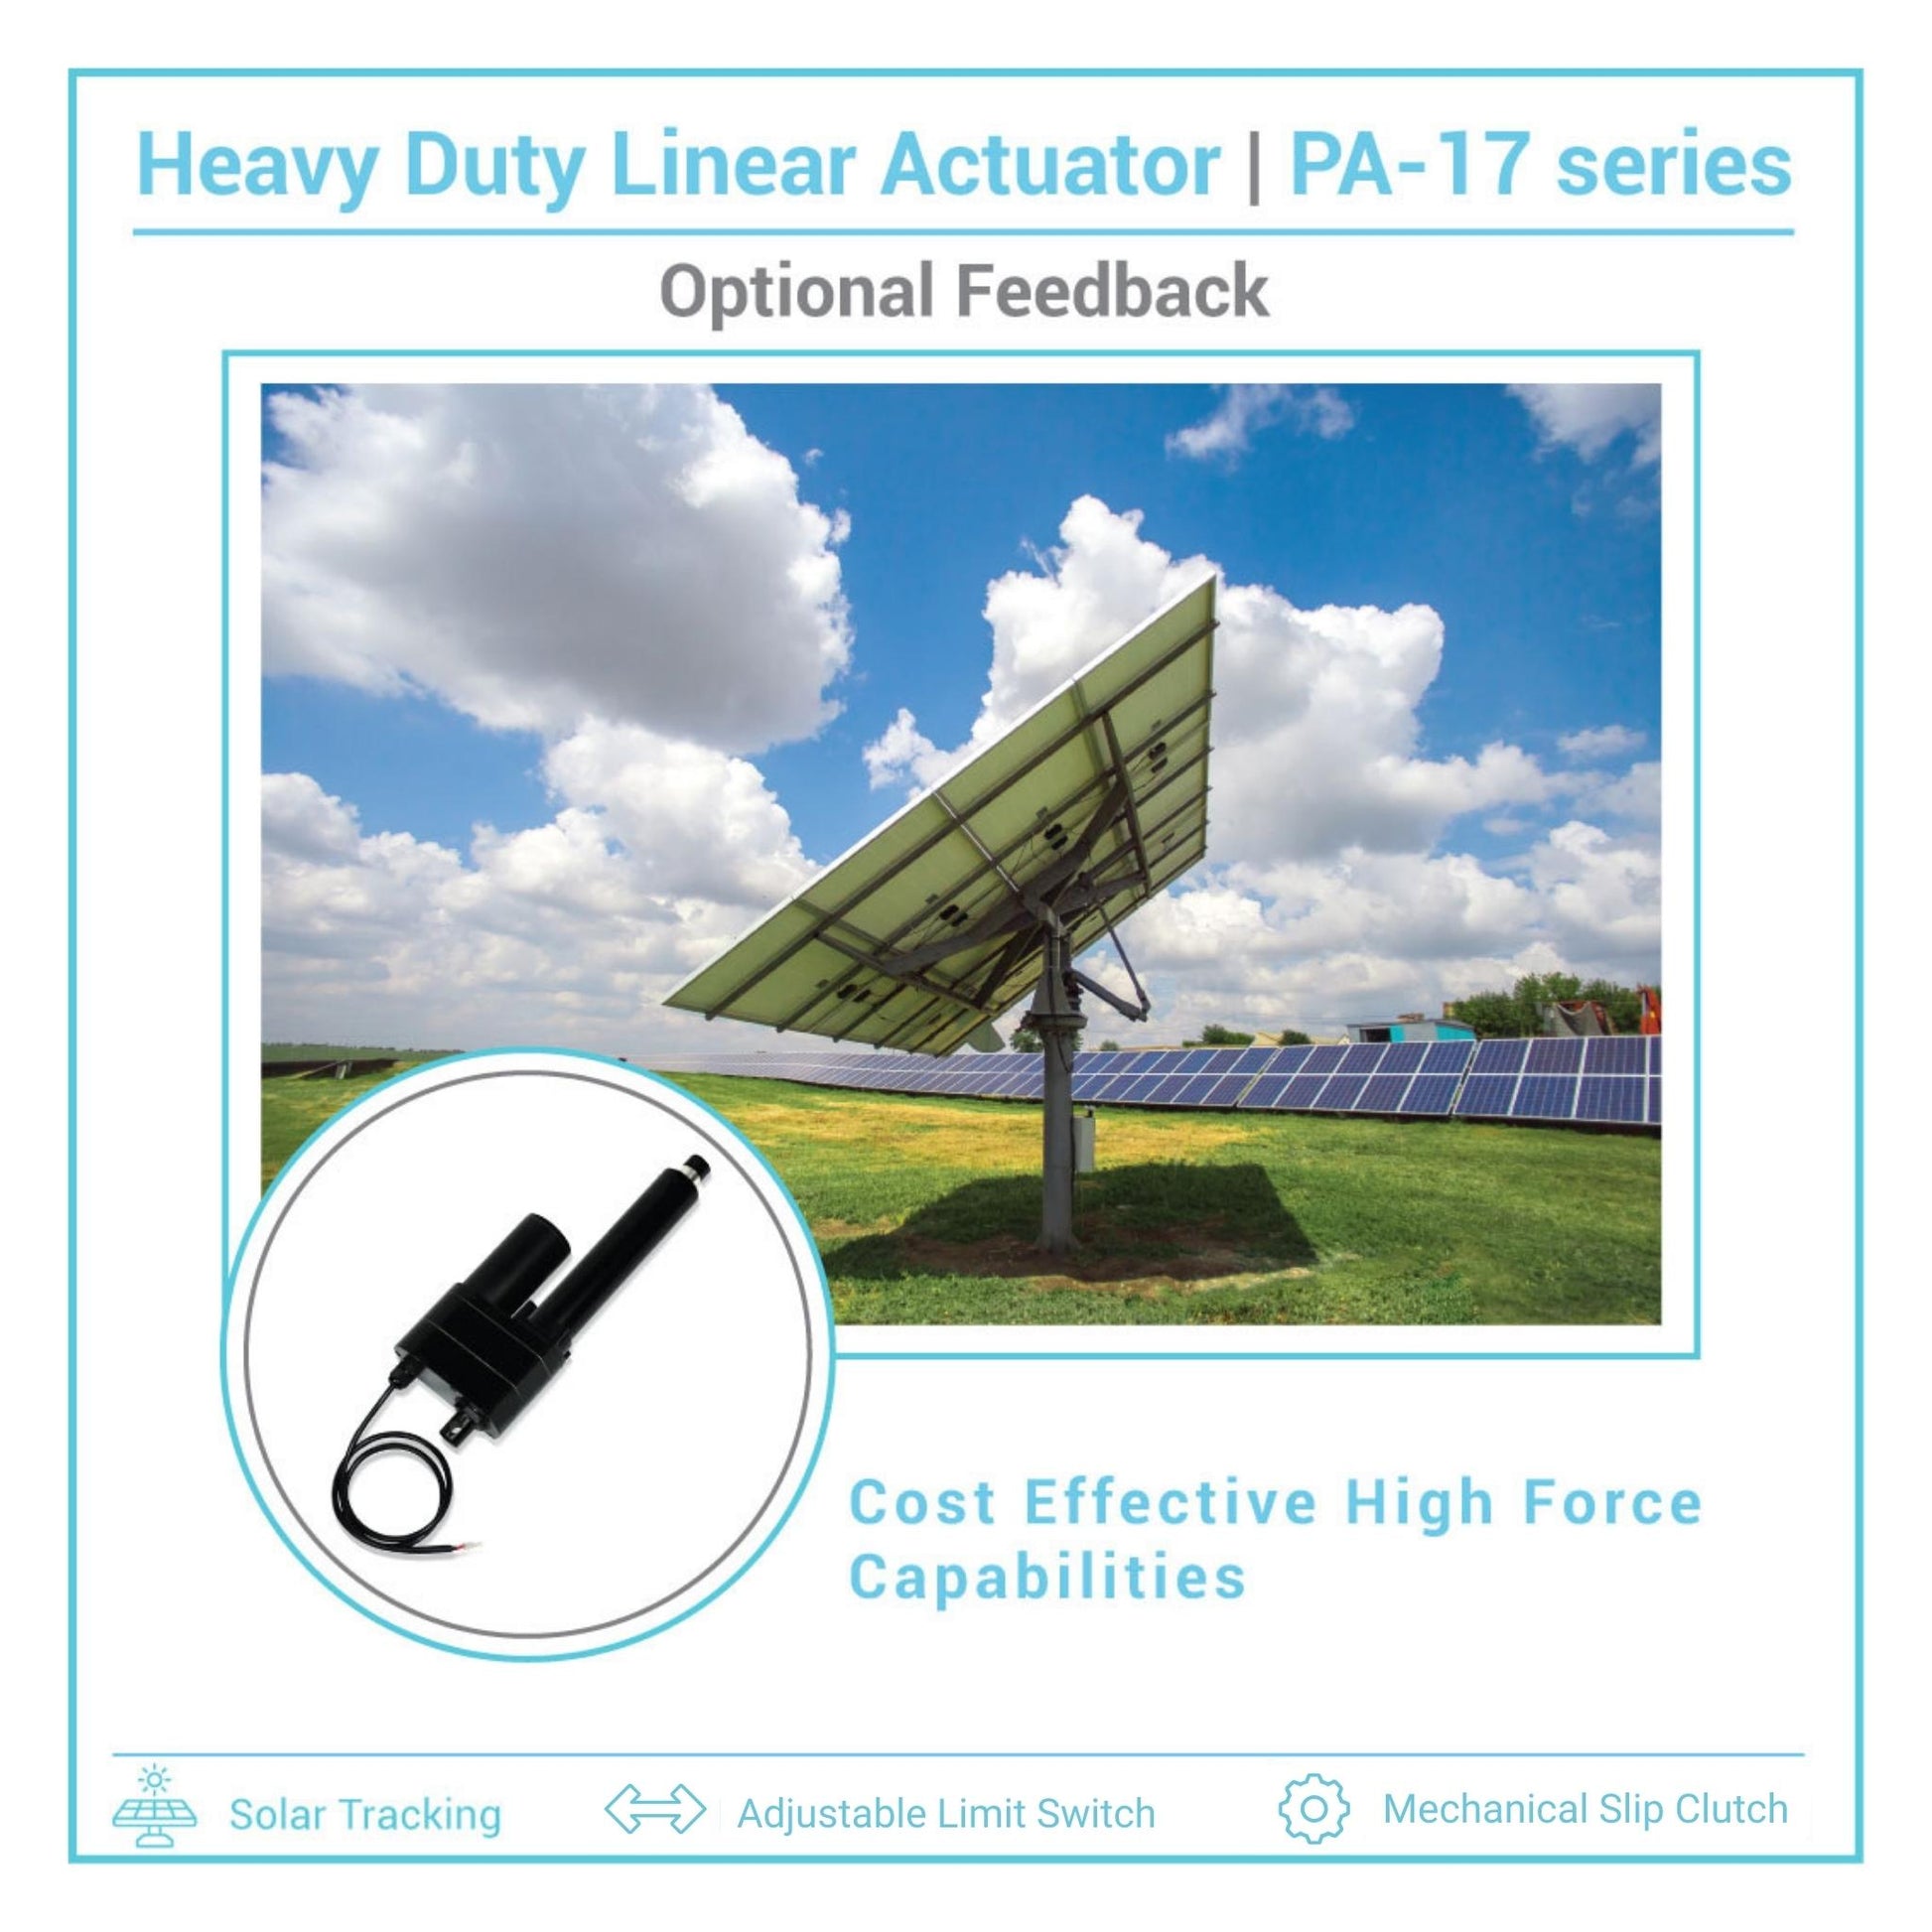 Heavy Duty Linear Actuator application options